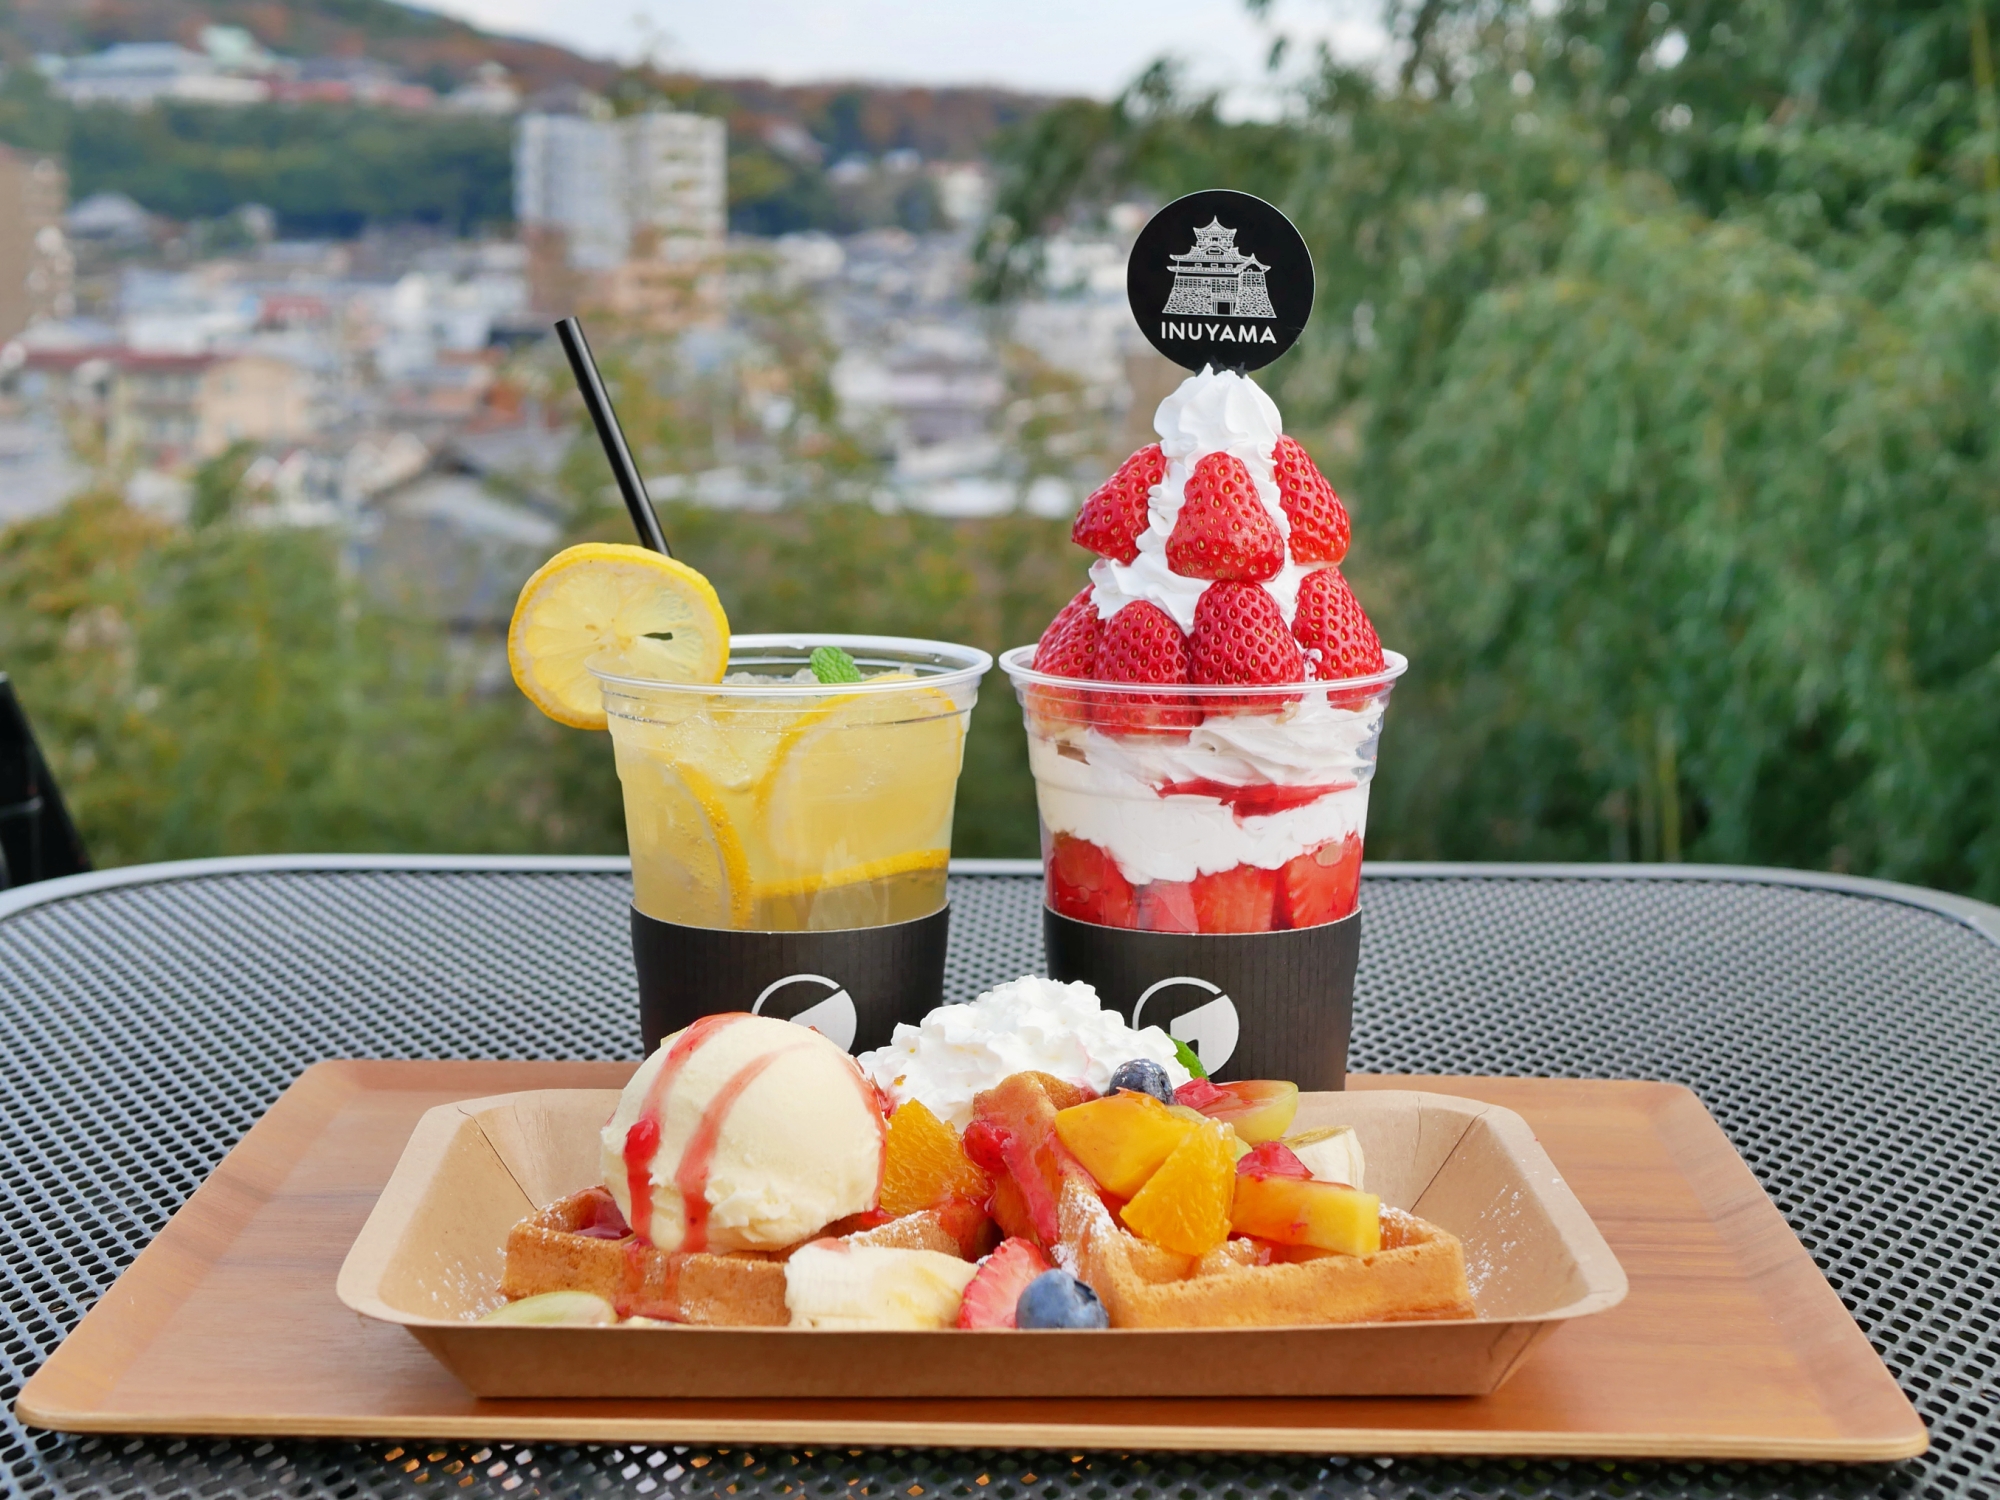 Enjoy seasonal fruits on the spacious terrace of 1st TERRACE INUYAMA, the closest cafe to Inuyama Castle!